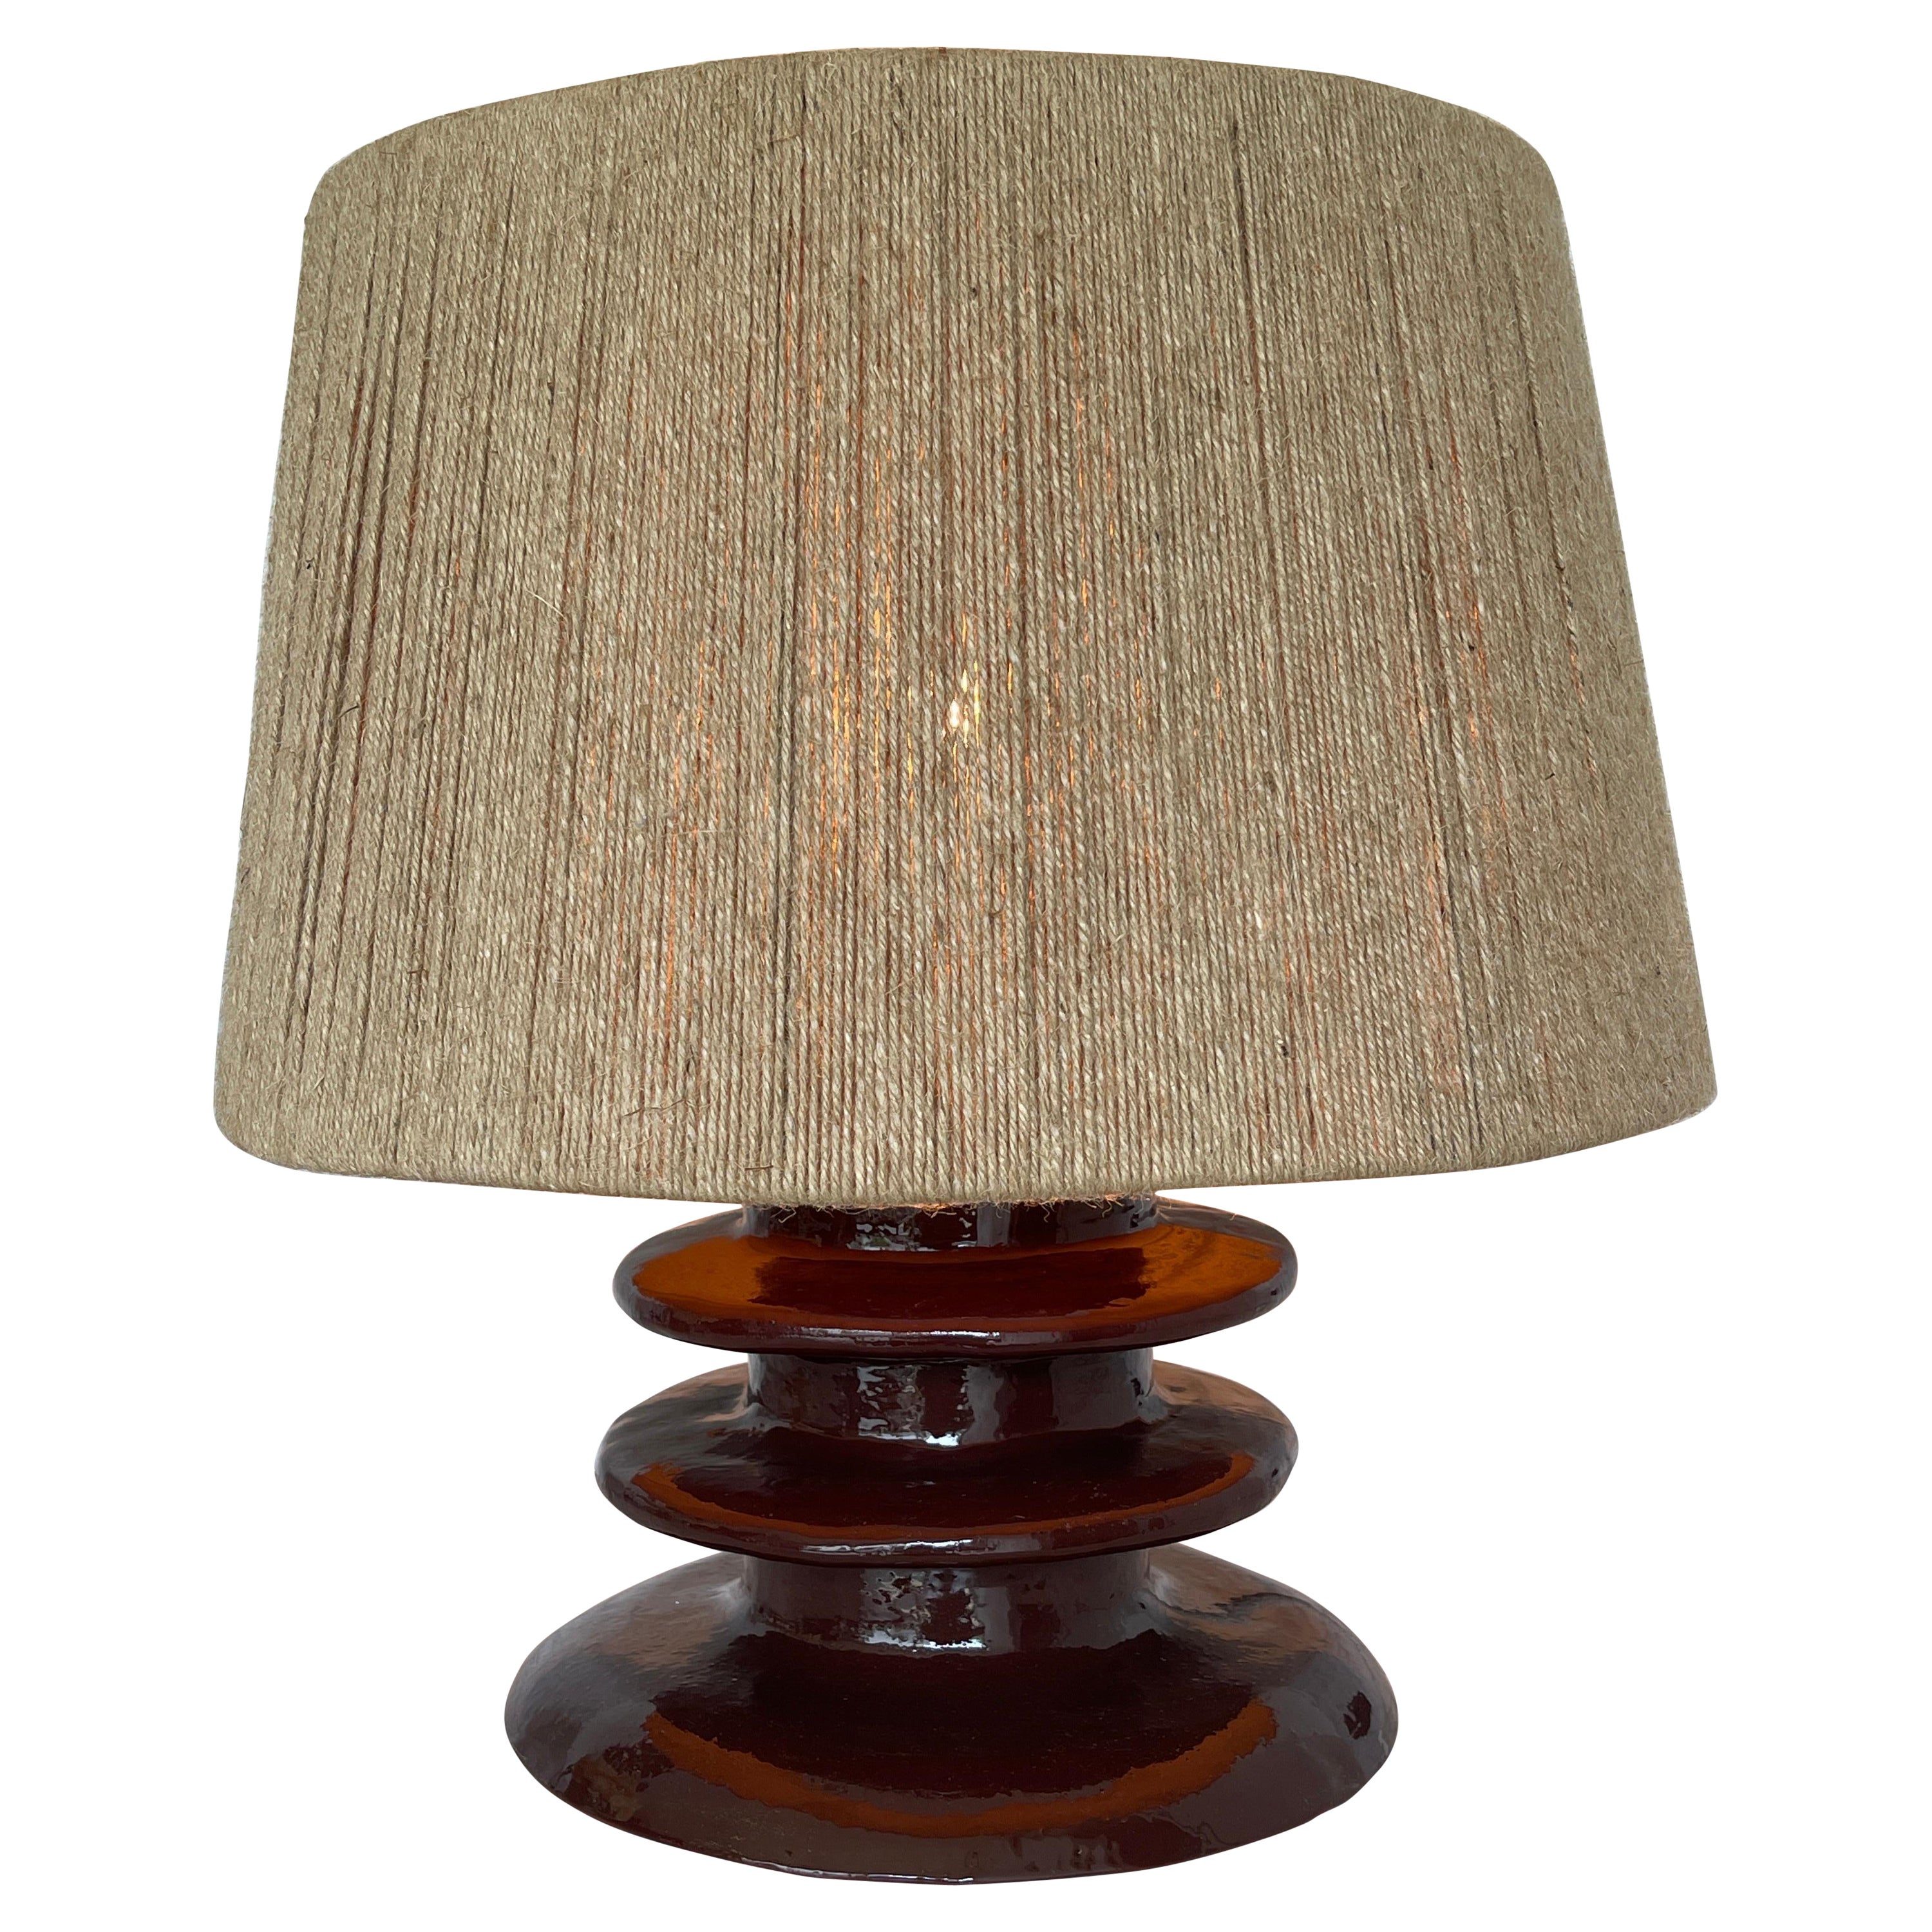 Pachamama XL lamp by Mariela Ceramica For Sale